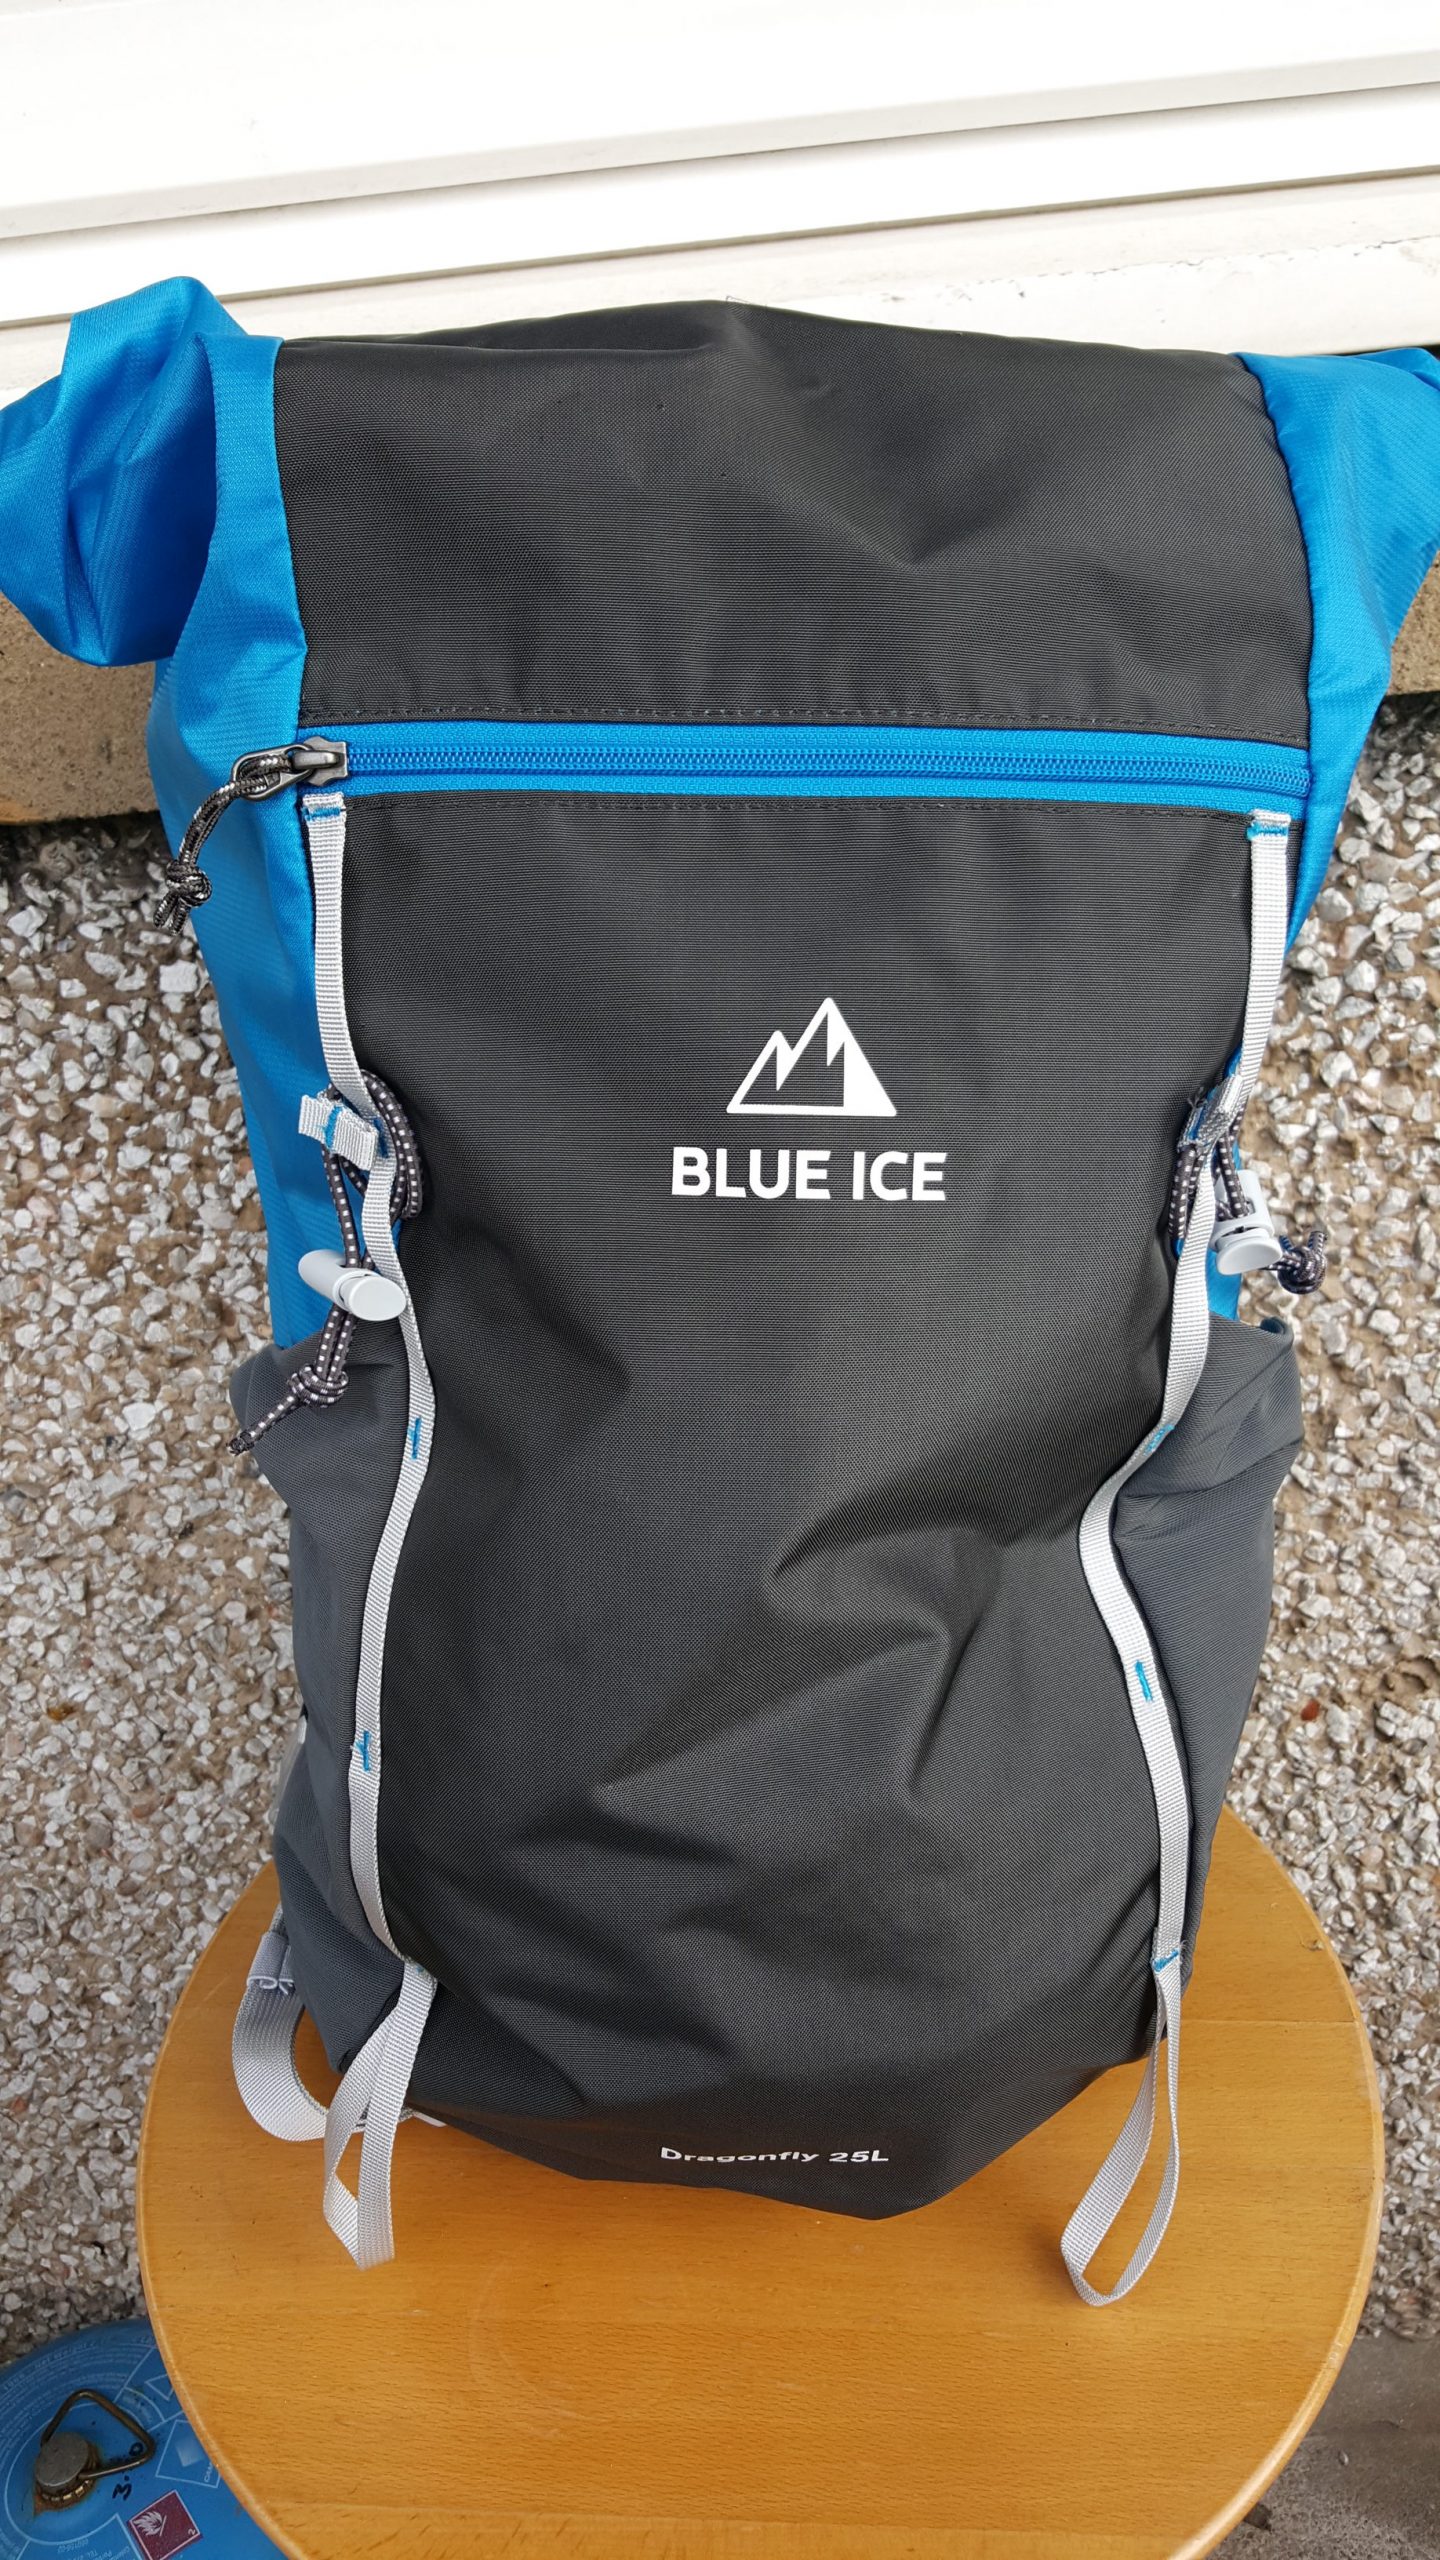 DRAGON FLY 25L BLUE ICE RUCKSACK: A REVIEW OF A GREAT LITTLE DAY PACK